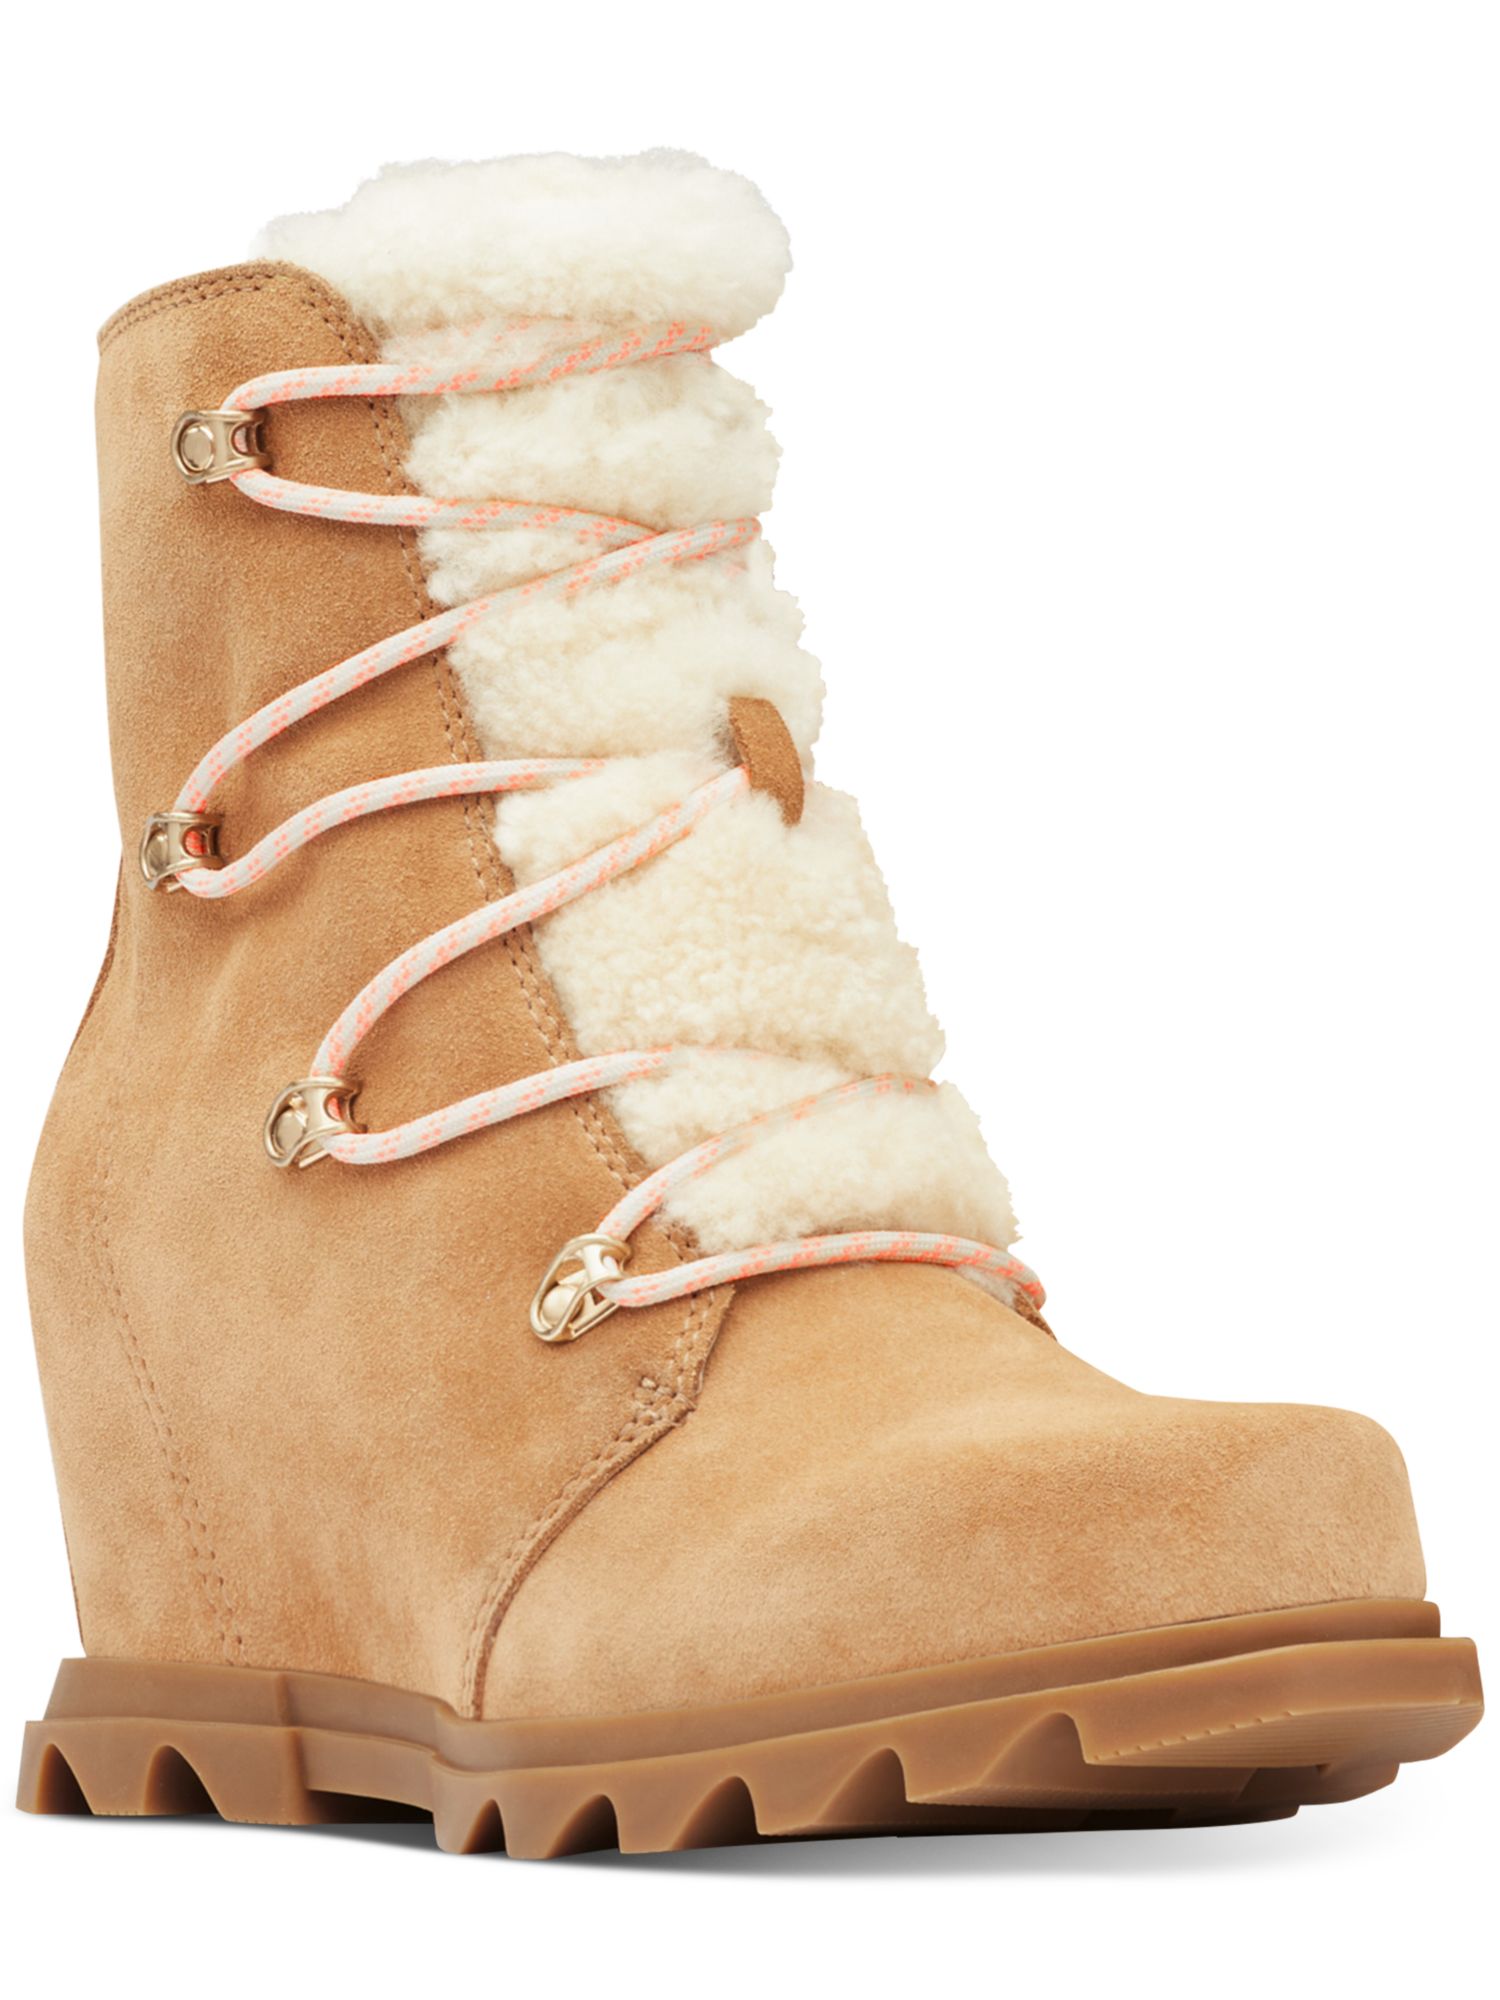 SOREL Womens Beige Shearling Tongue Padded Round Toe Lace-Up Leather Booties 5